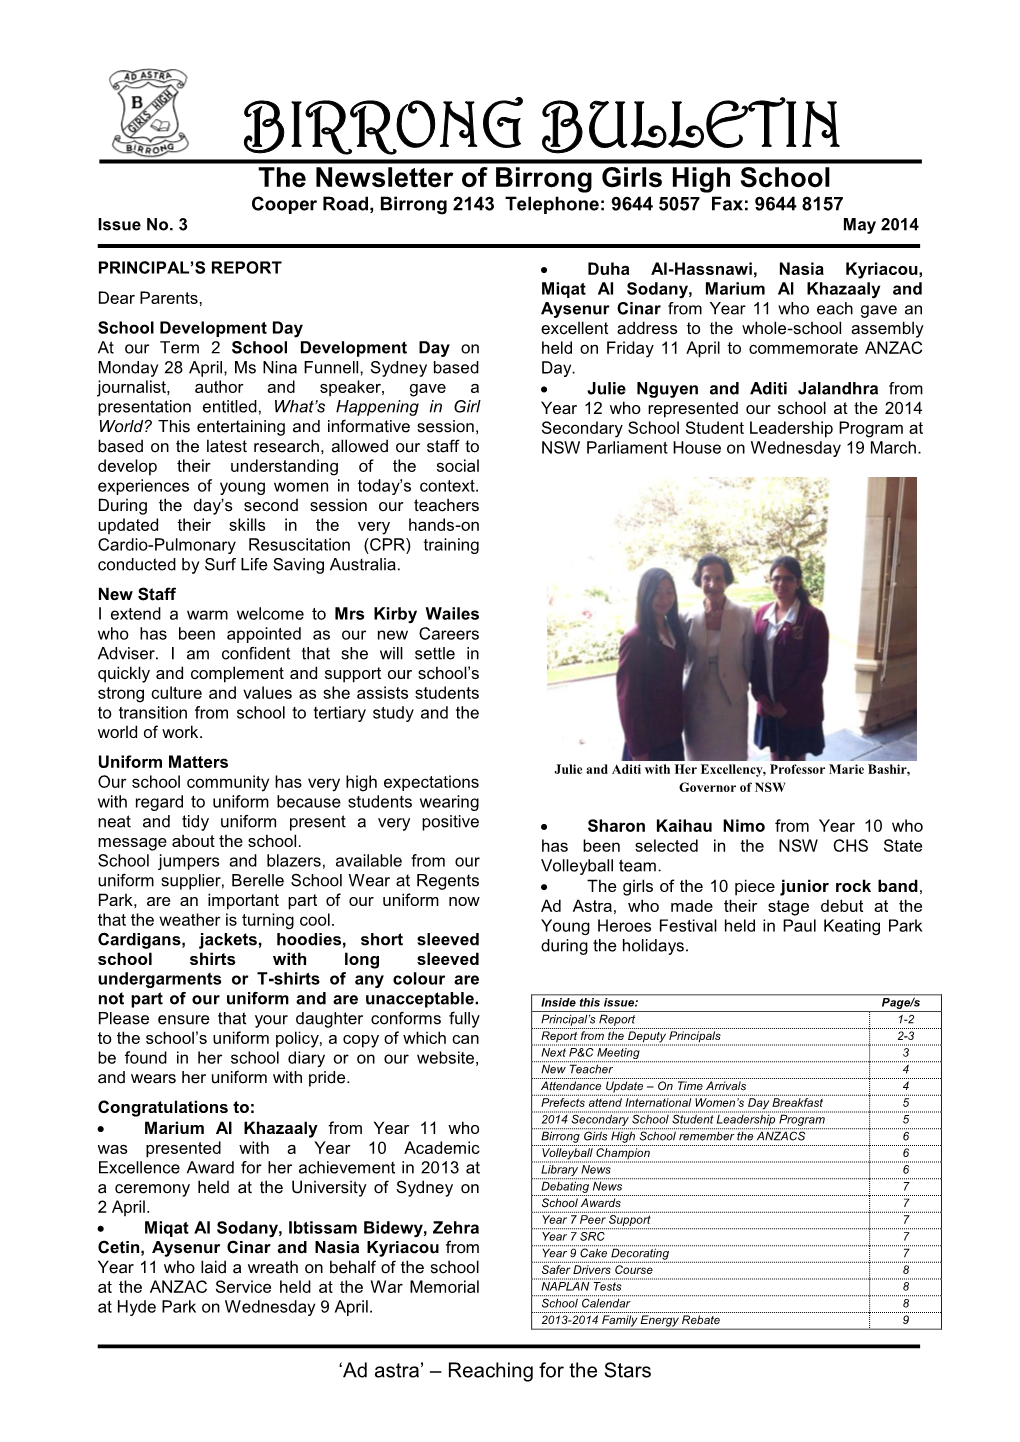 BIRRONG BULLETIN the Newsletter of Birrong Girls High School Cooper Road, Birrong 2143 Telephone: 9644 5057 Fax: 9644 8157 Issue No